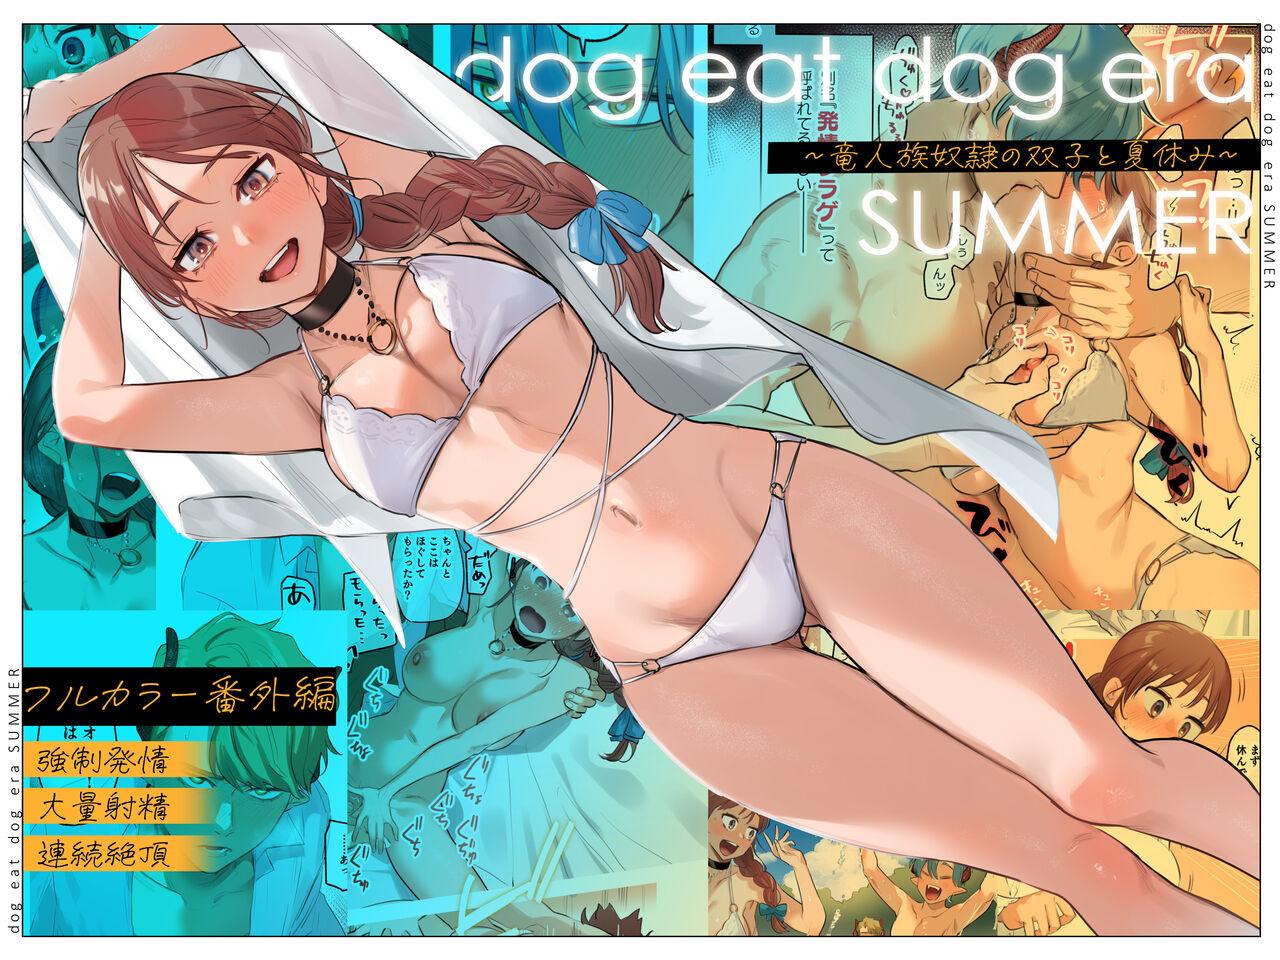 Amateur dog eat dog era SUMMER ∼ryūjinzoku dorei no futago to natsuyasumi | ∼Summer vacation with the twin slaves of the dragon race∼ - Original Adult Toys - Picture 1